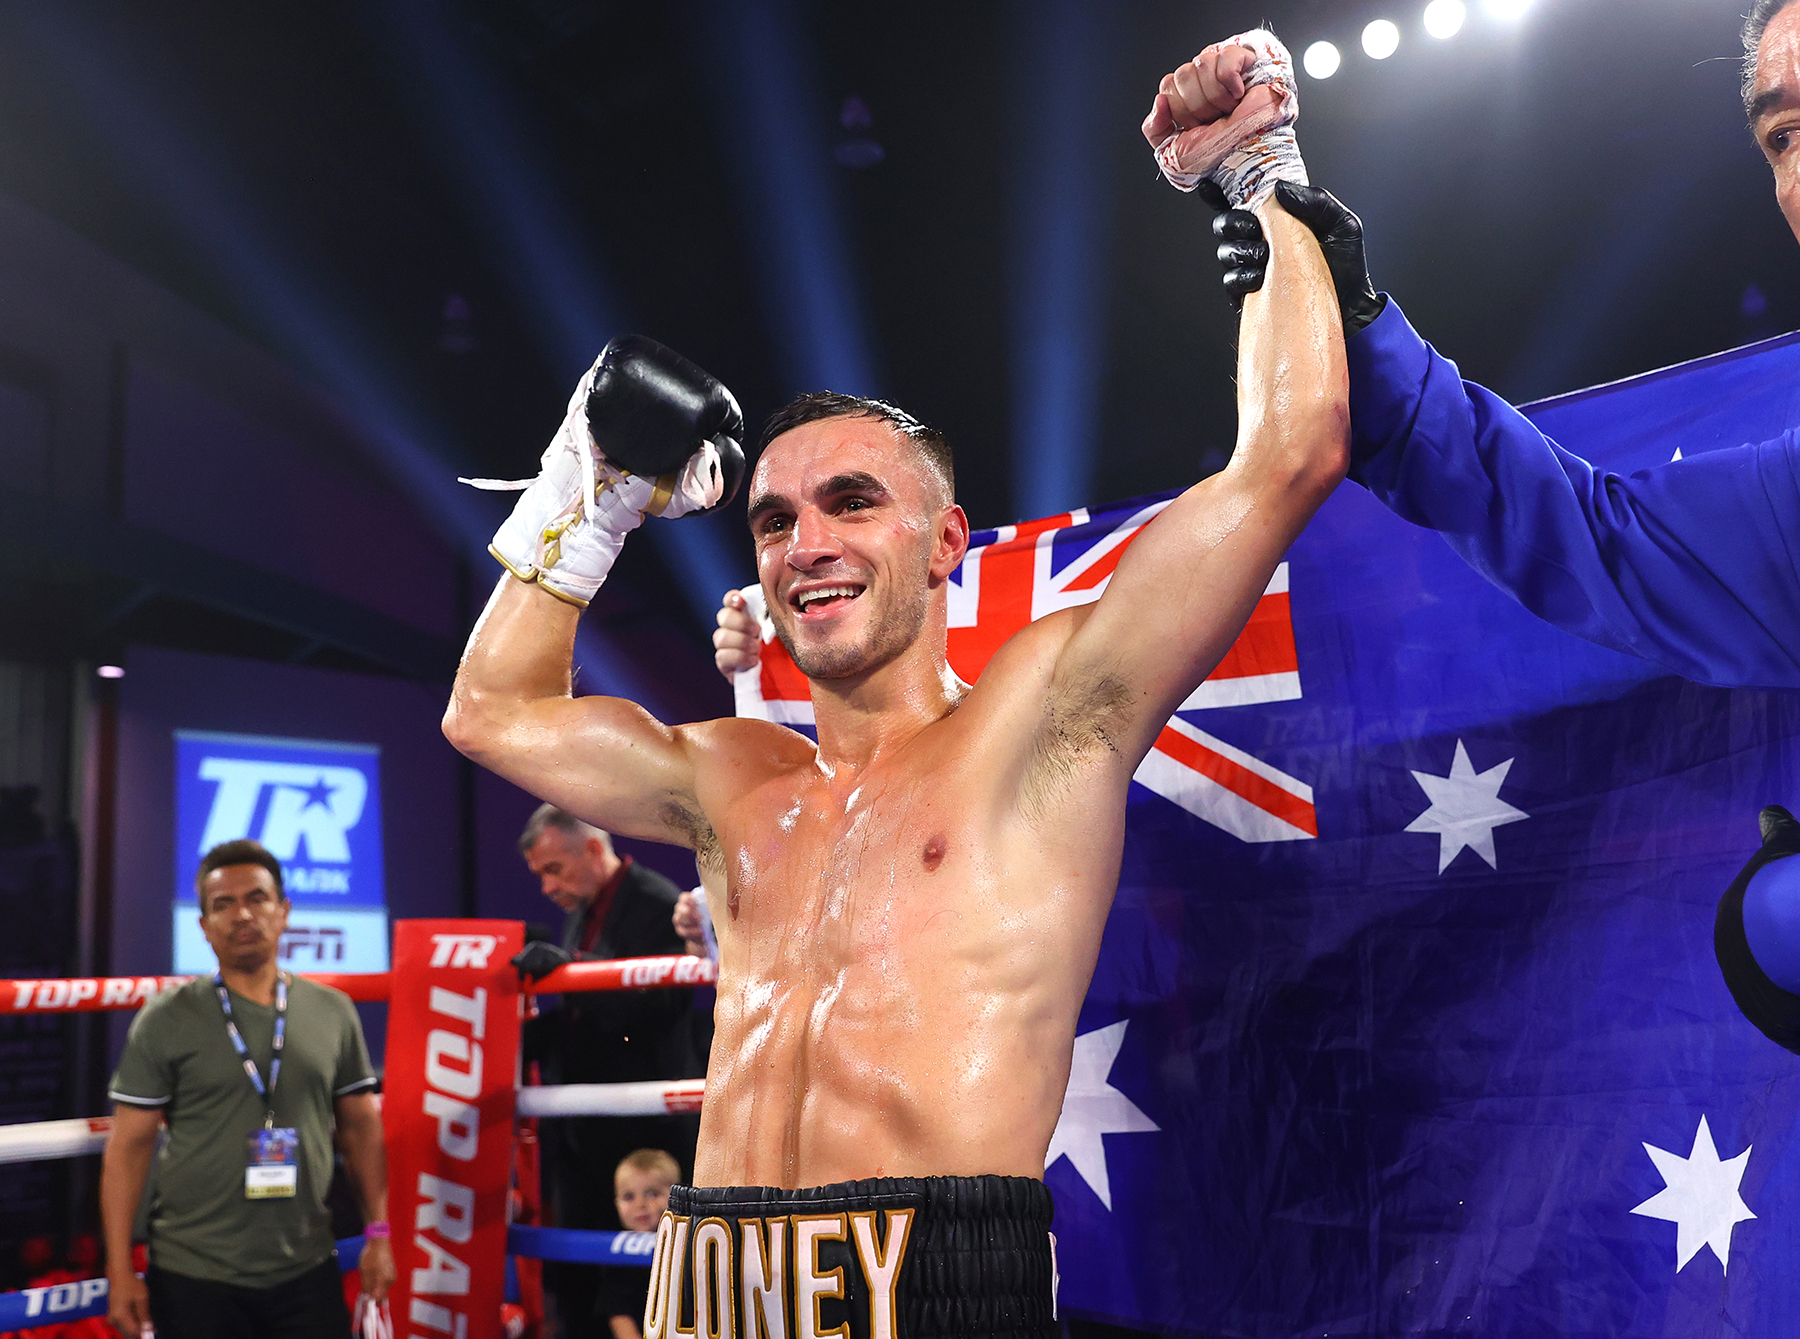 COSTA MESA, CALIFORNIA - APRIL 09: Andrew Moloney is victorious as he defeats Gilberto Mendoza during their junior bantamweight fight at The Hangar on April 09, 2022 in Costa Mesa, California. (Photo by Mikey Williams/Top Rank Inc via Getty Images)